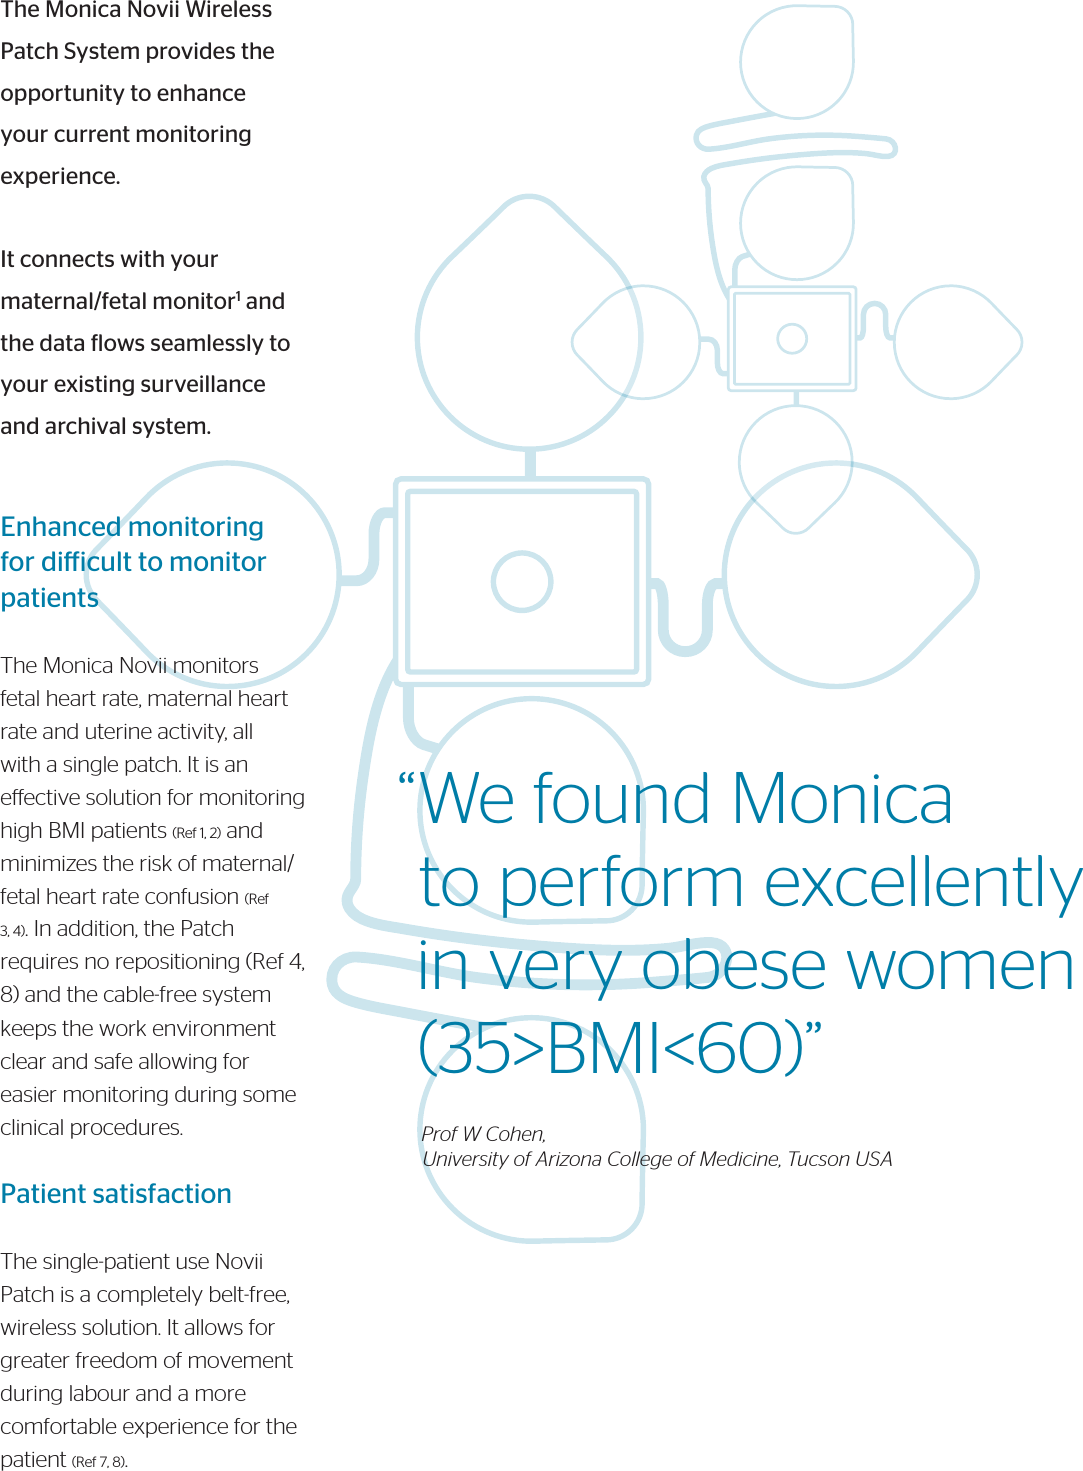 The Monica Novii Wireless Patch System provides the opportunity to enhance your current monitoring experience.It connects with your maternal/fetal monitor1 and the data lows seamlessly to your existing surveillance and archival system.Enhanced monitoring for diicult to monitor patientsThe Monica Novii monitors fetal heart rate, maternal heart rate and uterine activity, all with a single patch. It is an eective solution for monitoring high BMI patients (Ref 1, 2) and minimizes the risk of maternal/fetal heart rate confusion (Ref 3, 4). In addition, the Patch requires no repositioning (Ref 4, 8) and the cable-free systemkeeps the work environmentclear and safe allowing foreasier monitoring during someclinical procedures.Patient satisfactionThe single-patient use Novii Patch is a completely belt-free, wireless solution. It allows for greater freedom of movement during labour and a more comfortable experience for the patient (Ref 7, 8).“We found Monica  to perform excellently  in very obese women   (35&gt;BMI&lt;60)”      Prof W Cohen,      University of Arizona College of Medicine, Tucson USA